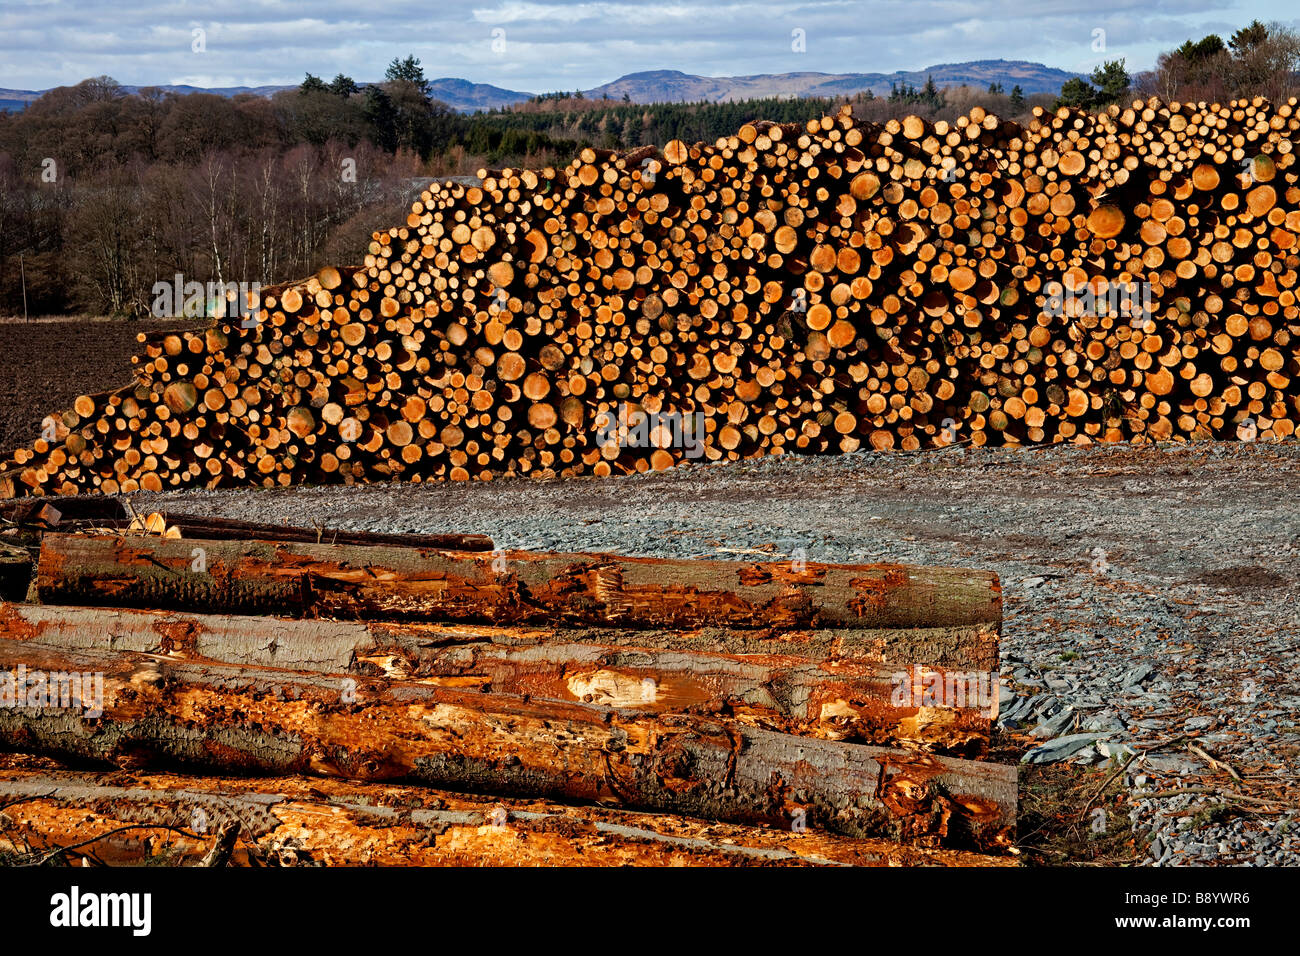 Piles of conifer timber logs, Perthshire, Scotland, UK, Europe Stock Photo